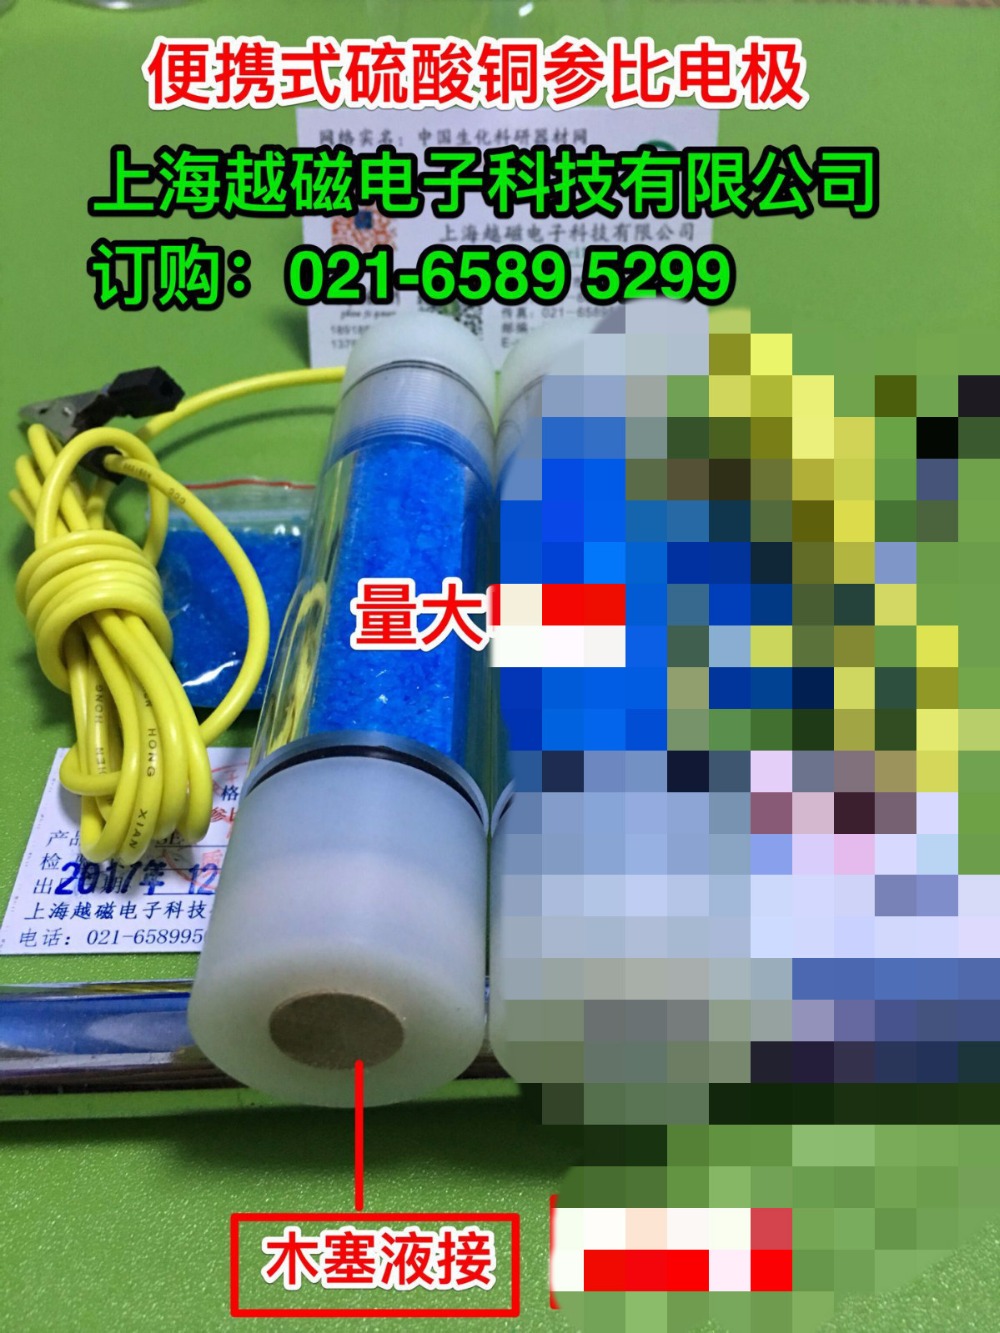 YC-1 portable copper sulfate reference electrode, cathodic protection potential reference electrode, and cork solution.